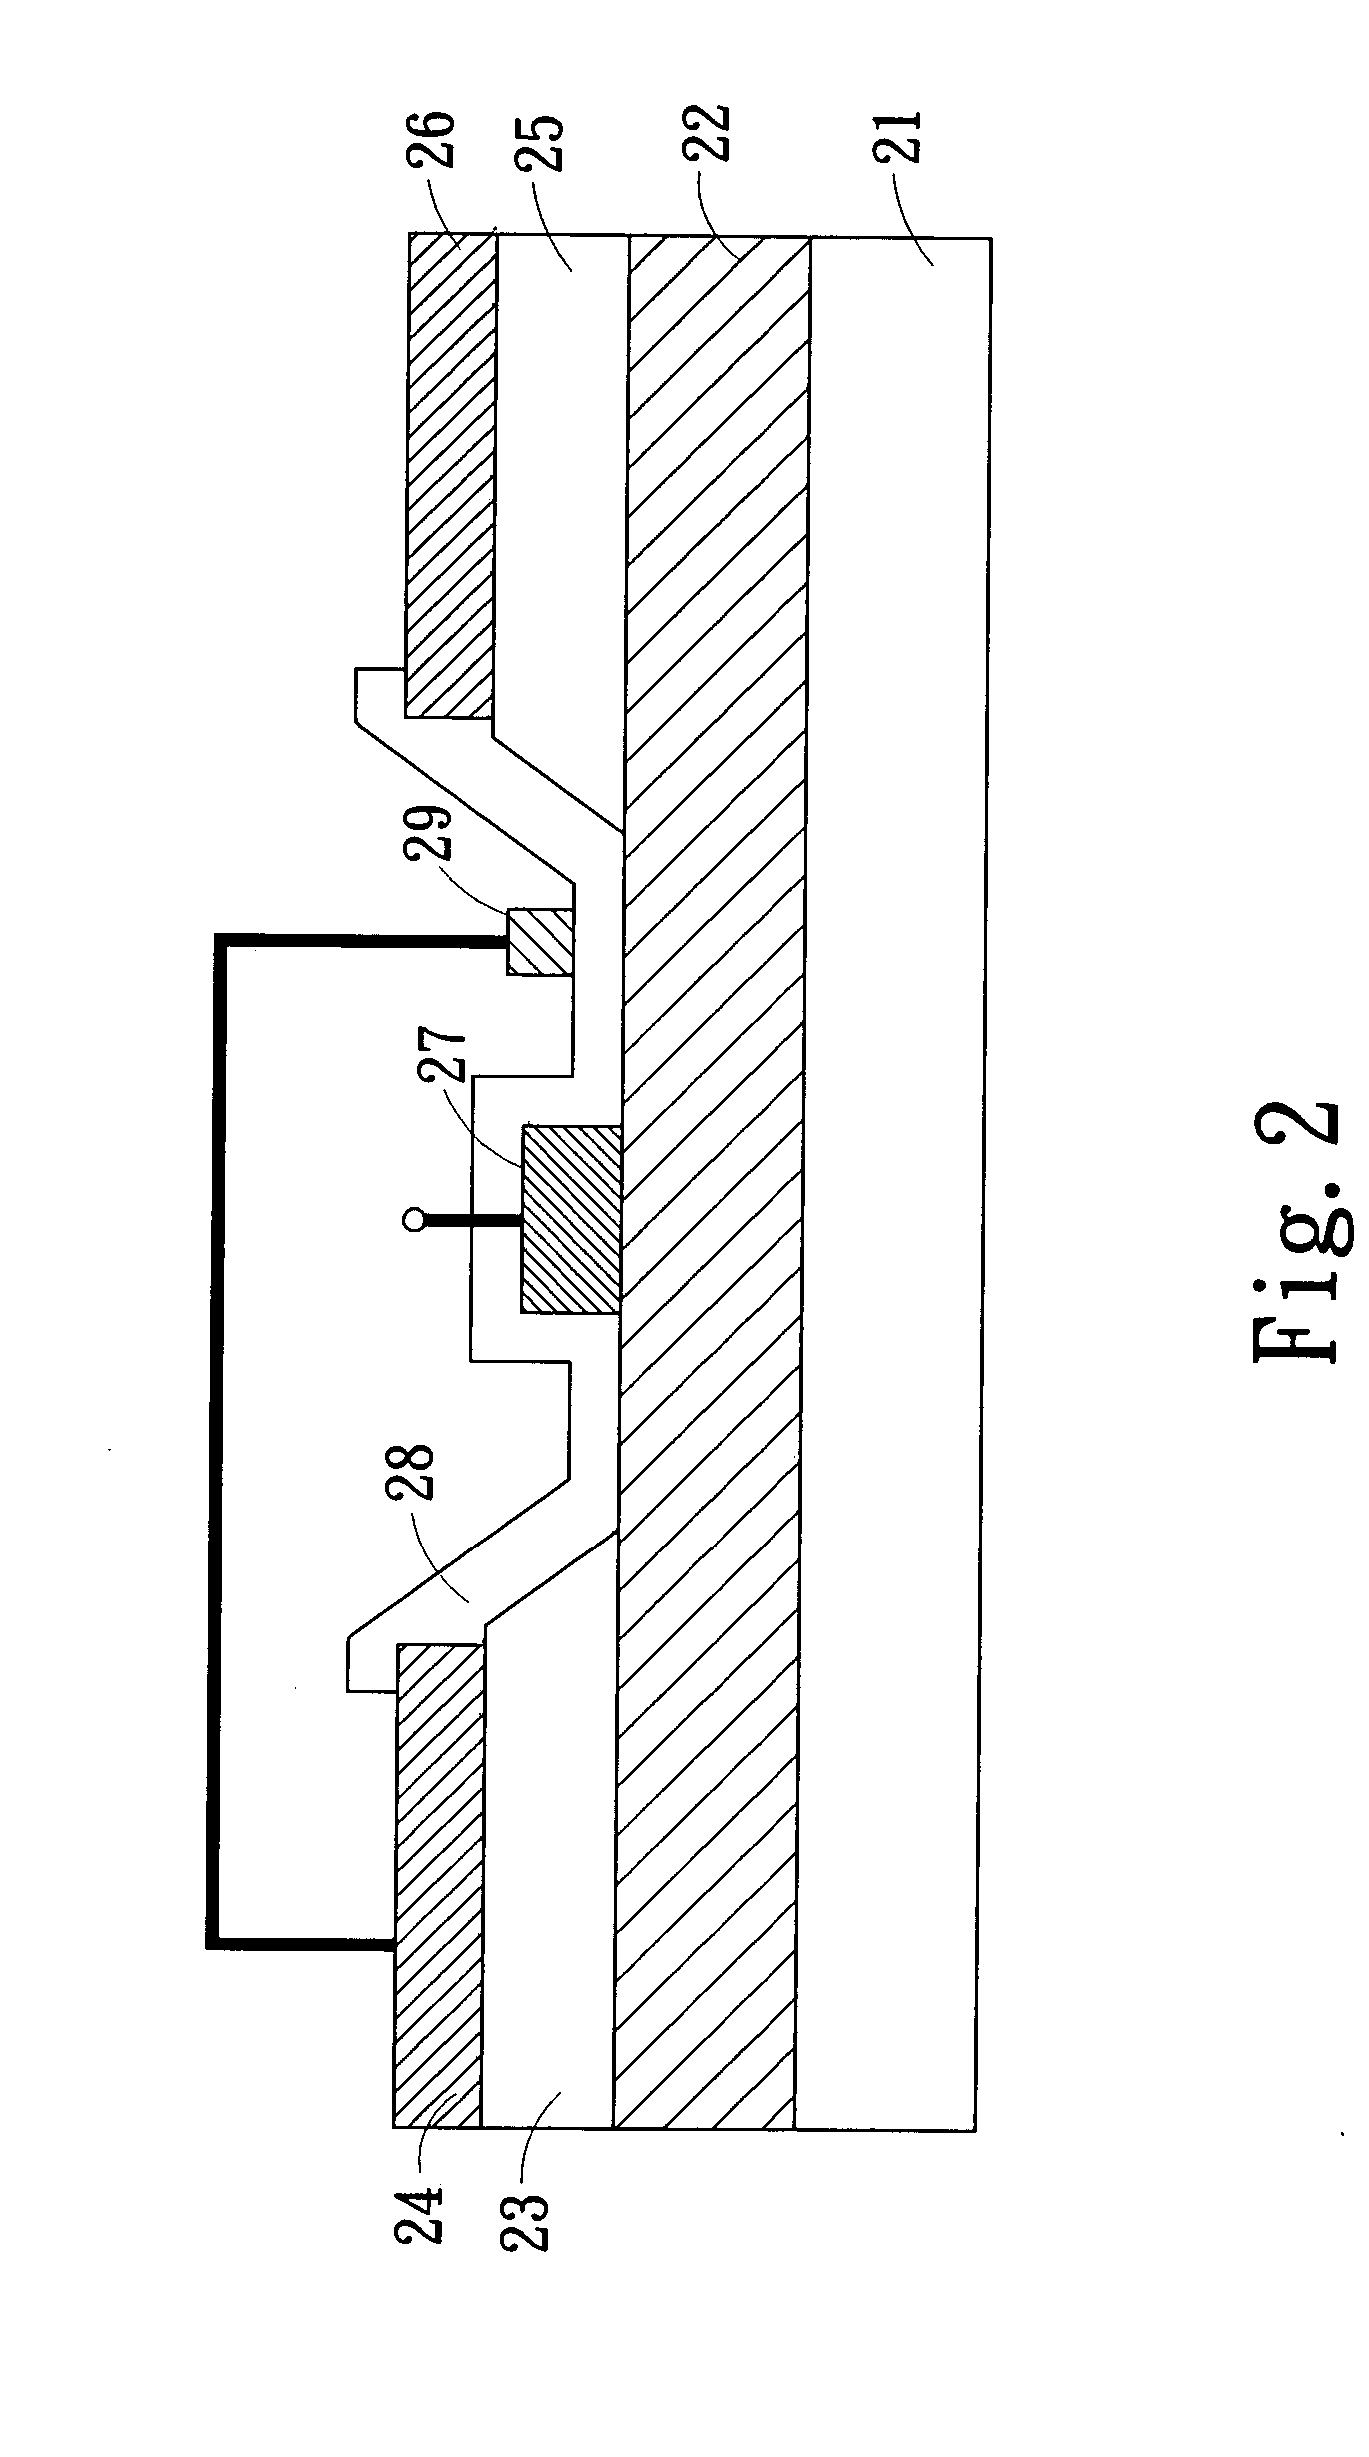 Semiconductor devices integrating high-voltage and low-voltage field effect transistors on the same wafer